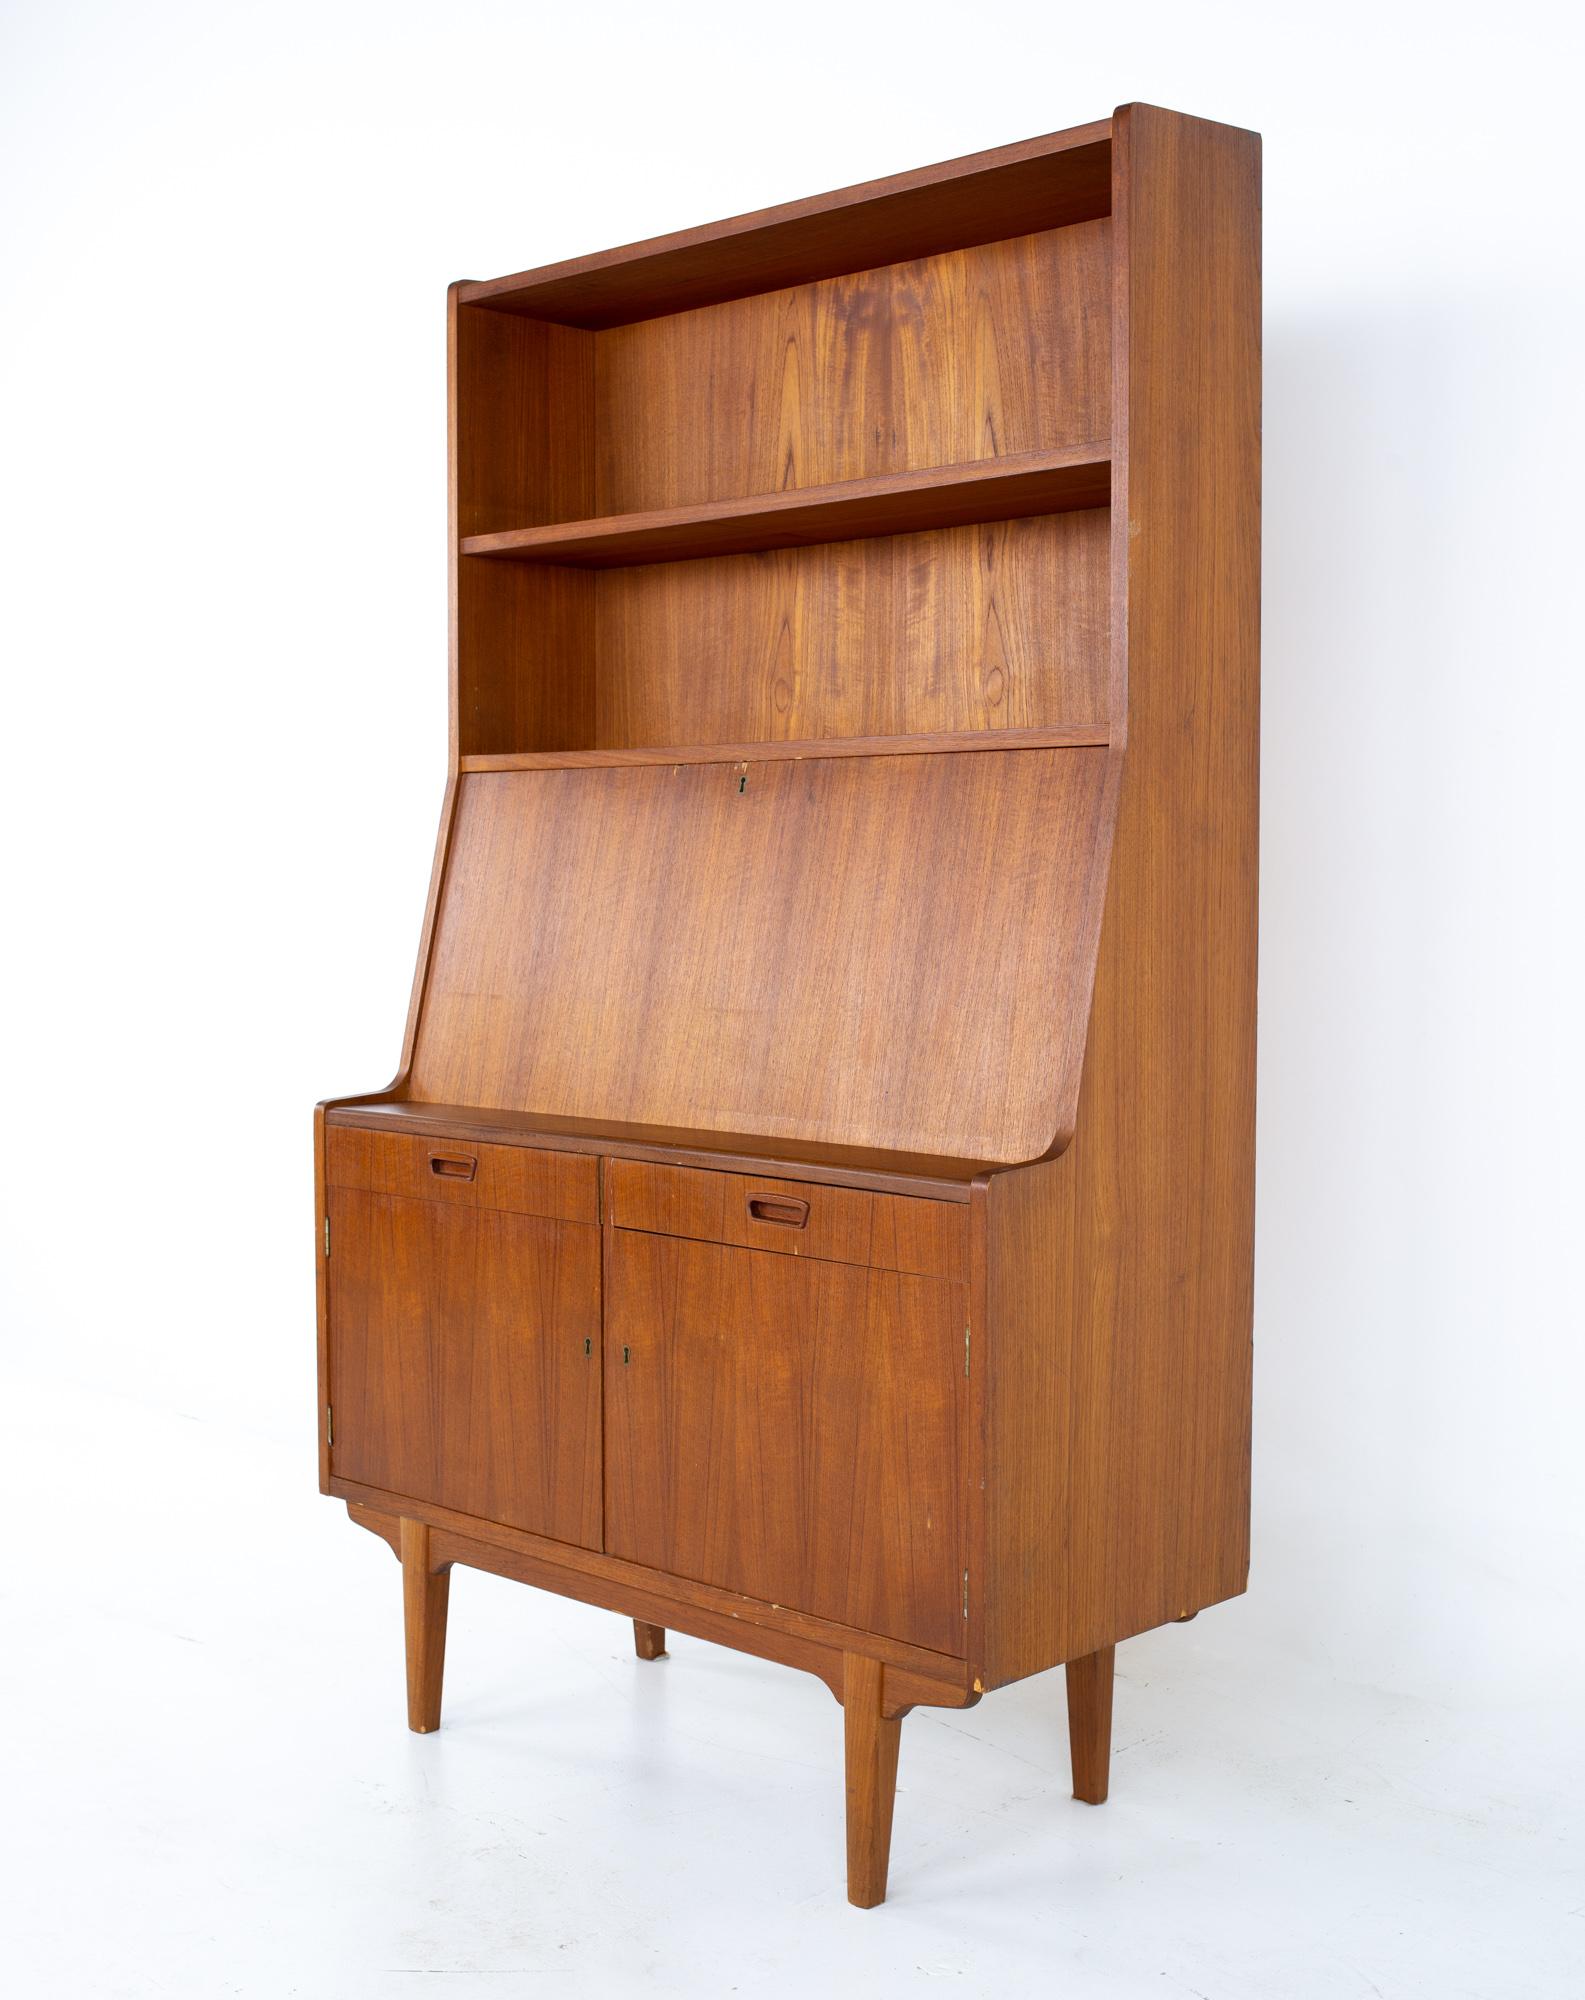 Mid Century Danish teak drop front secretary desk bar bookcase
Bookcase measures: 39.5 wide x 16.75 deep x 65.75 inches high

All pieces of furniture can be had in what we call restored vintage condition. That means the piece is restored upon